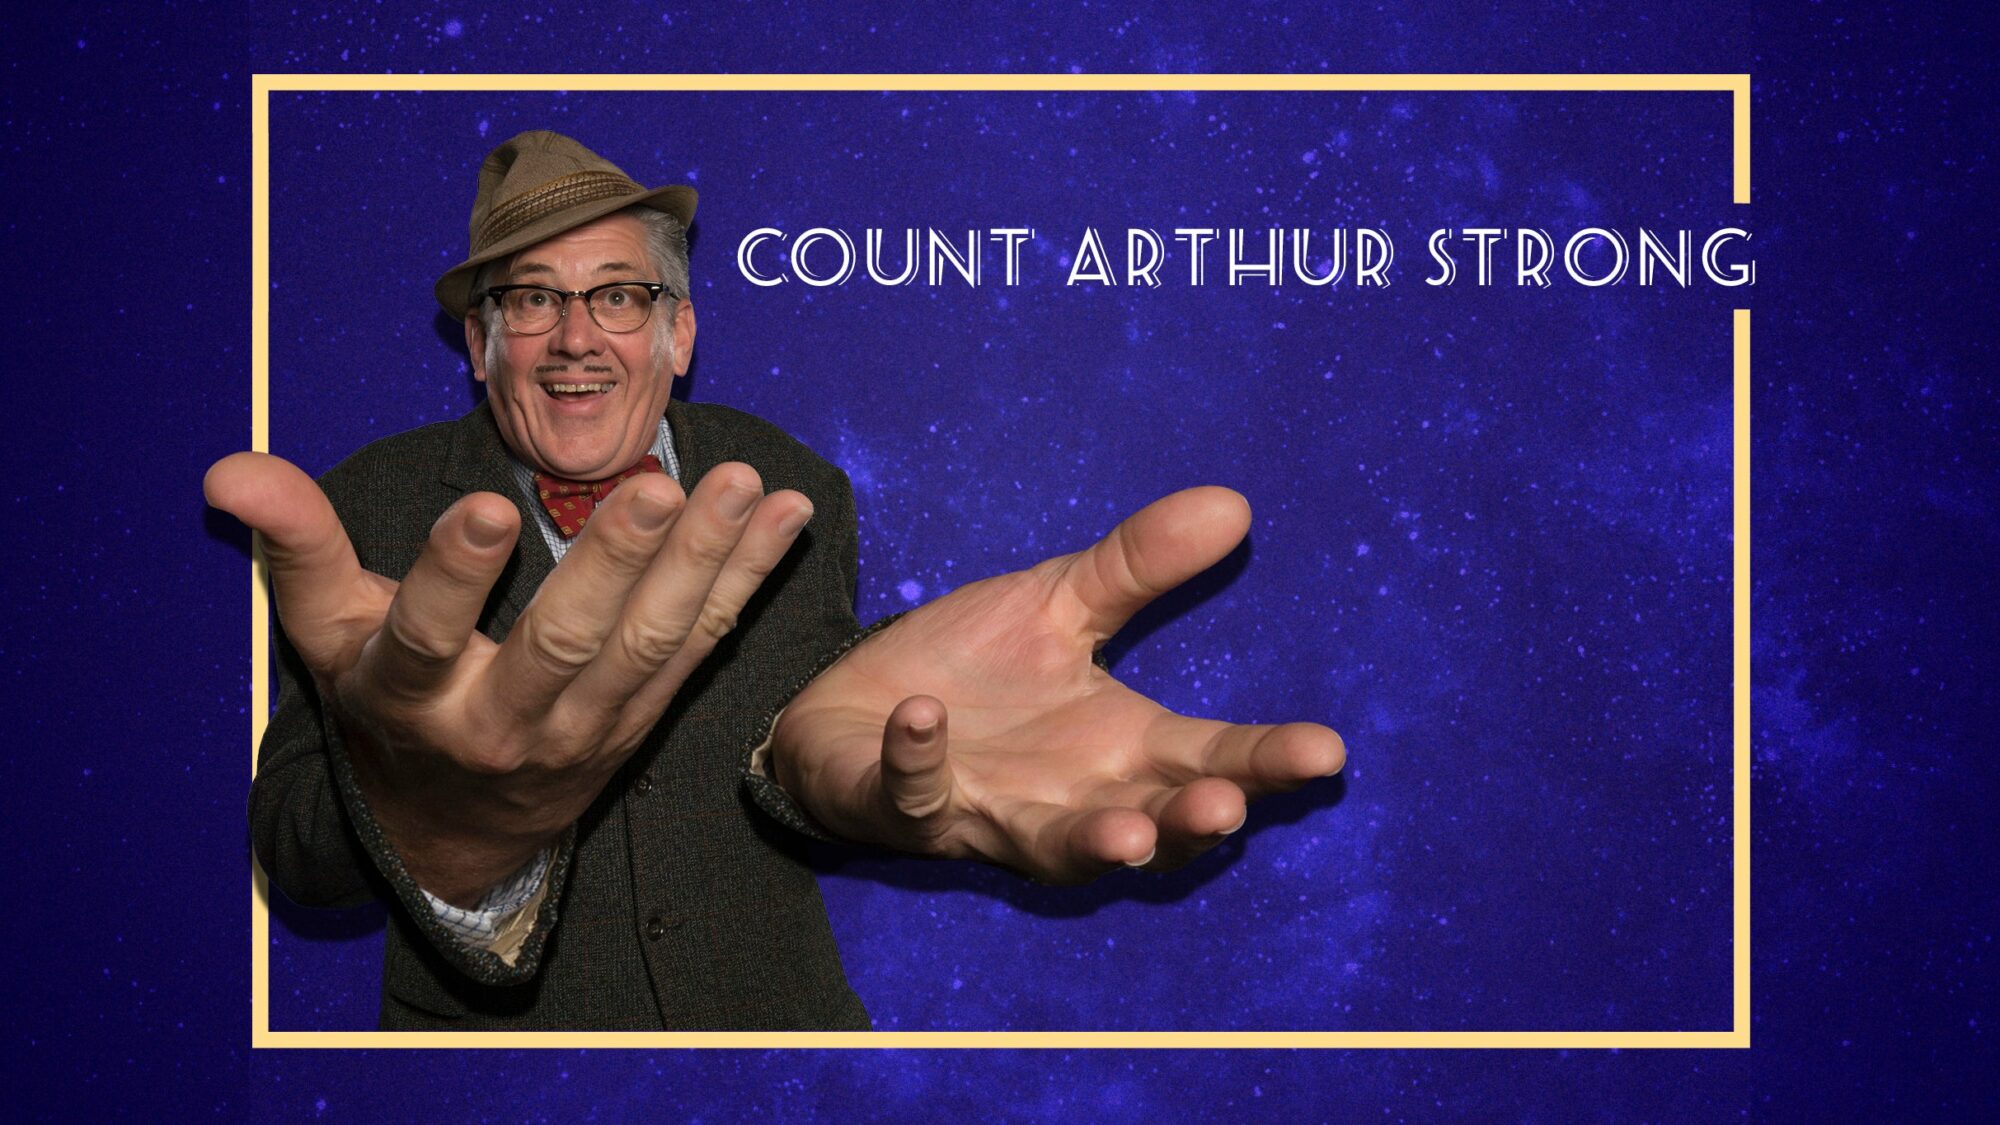 Image name Count Arthur Strong and Its Goodnight From Him at Lawrence Batley Theatre Huddersfield the 6 image from the post Count Arthur Strong - ...and It's Goodnight From Him at Cast Doncaster, Doncaster in Yorkshire.com.